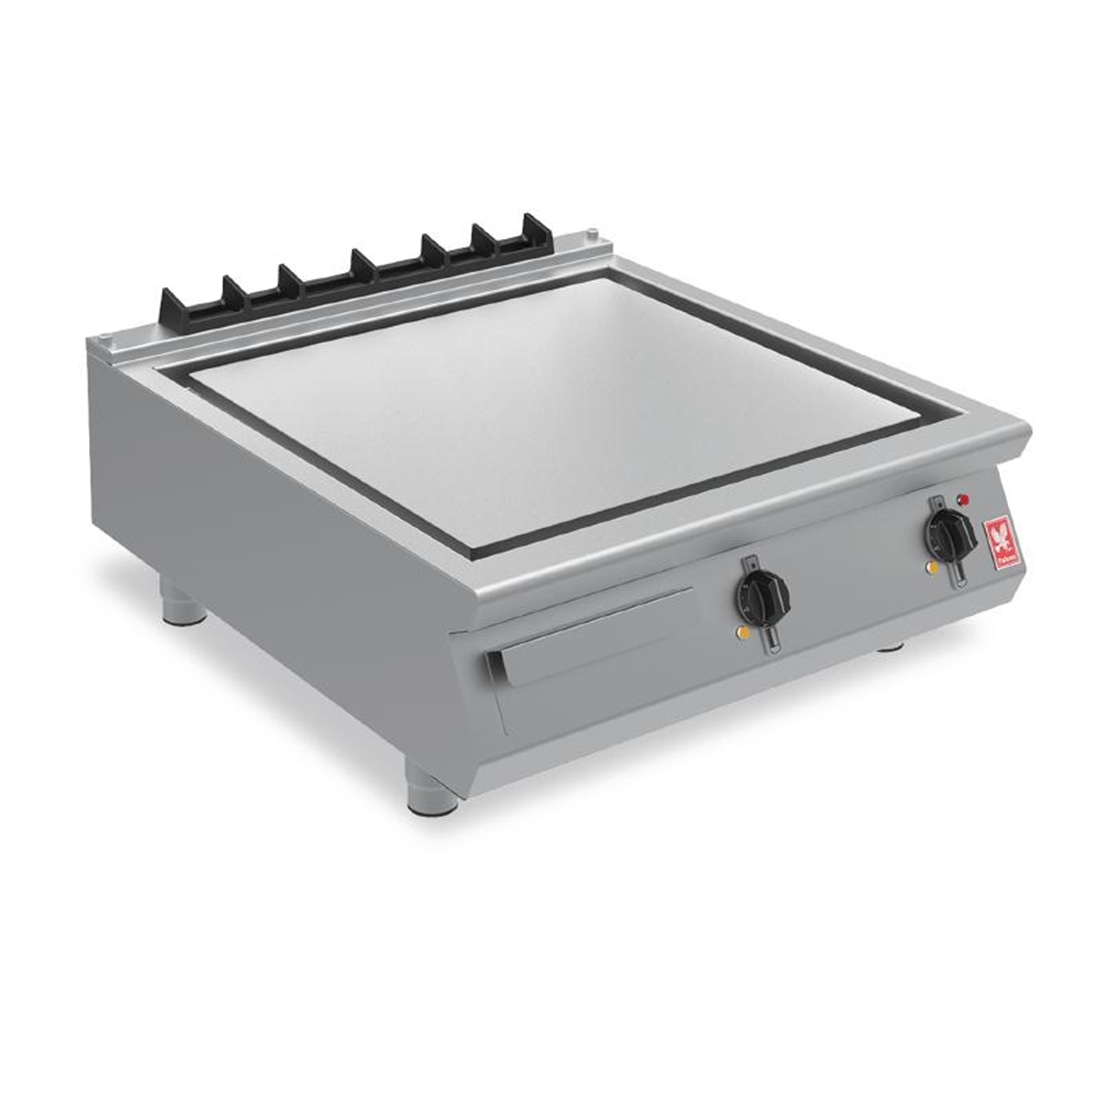 Falcon F900 Smooth Steel 800mm Griddle E9581